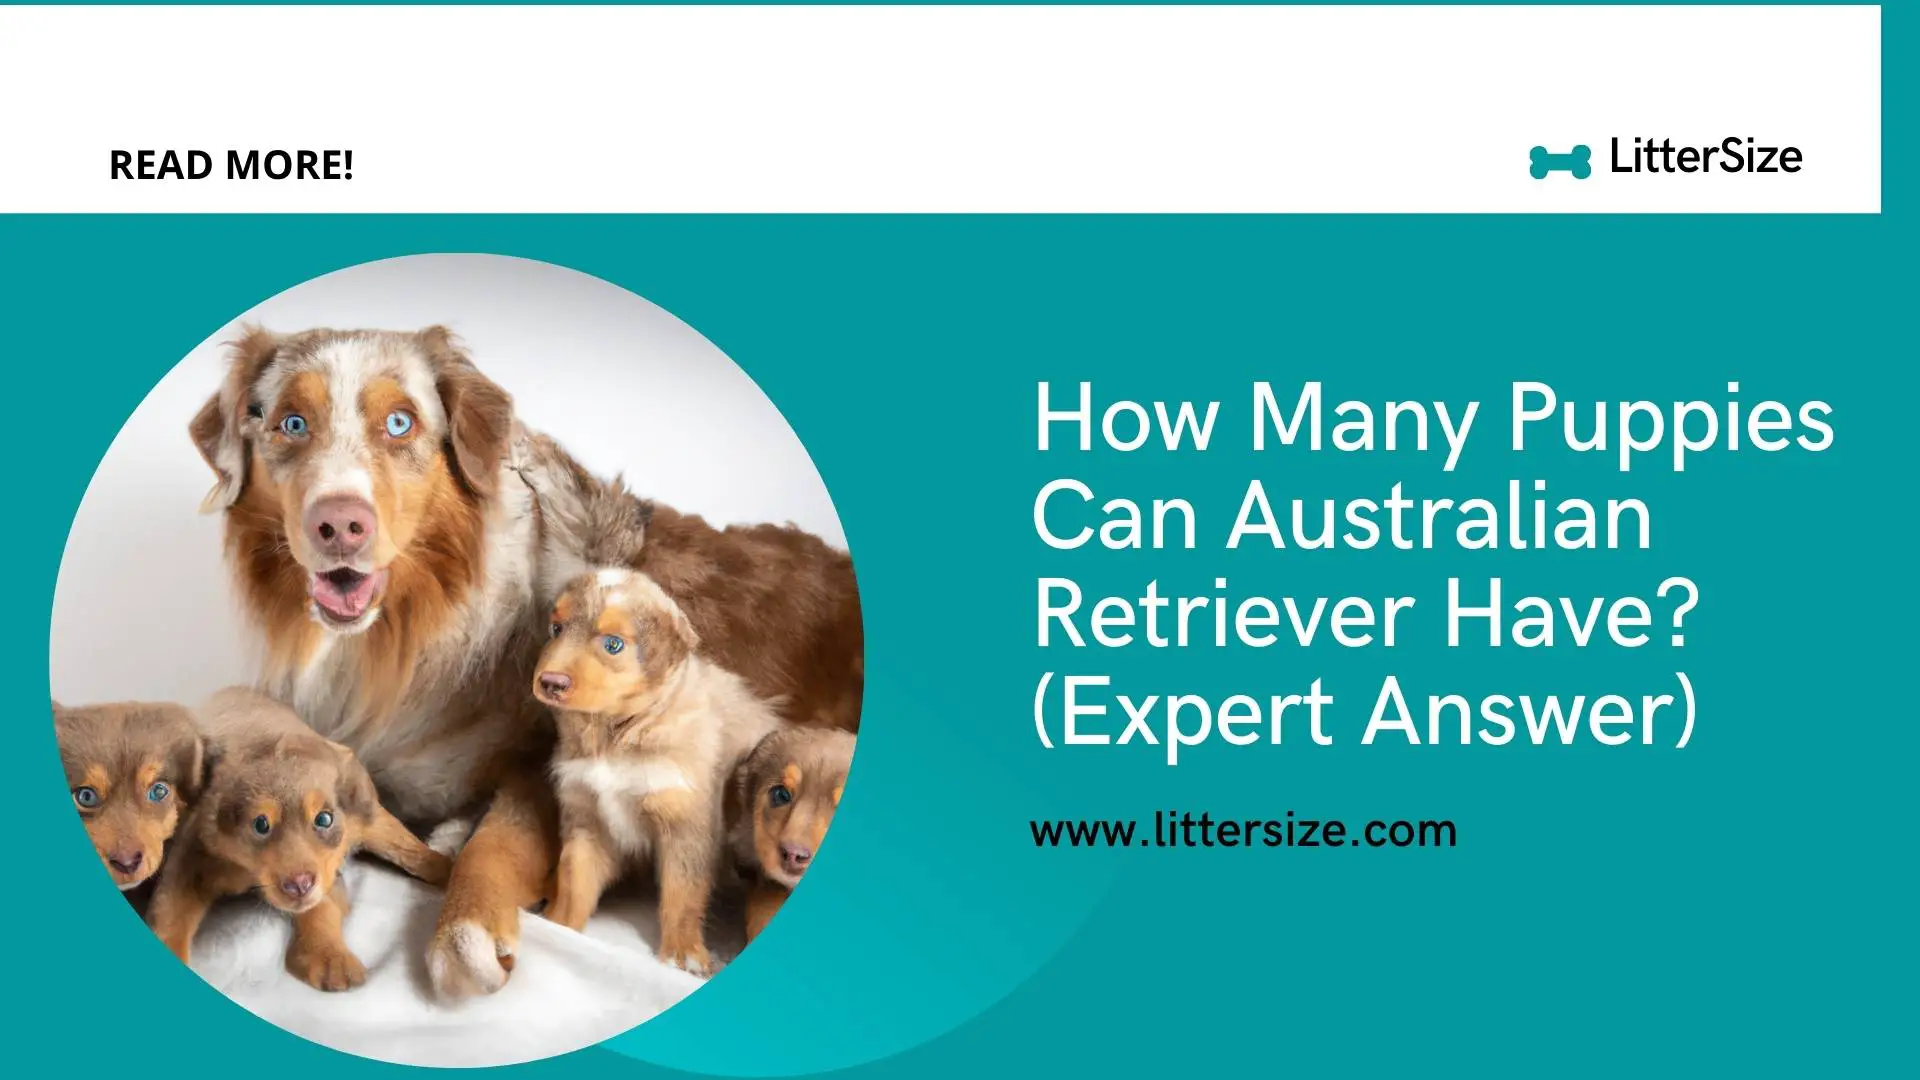 How Many Puppies Can Australian Retriever Have? (Expert Answer)